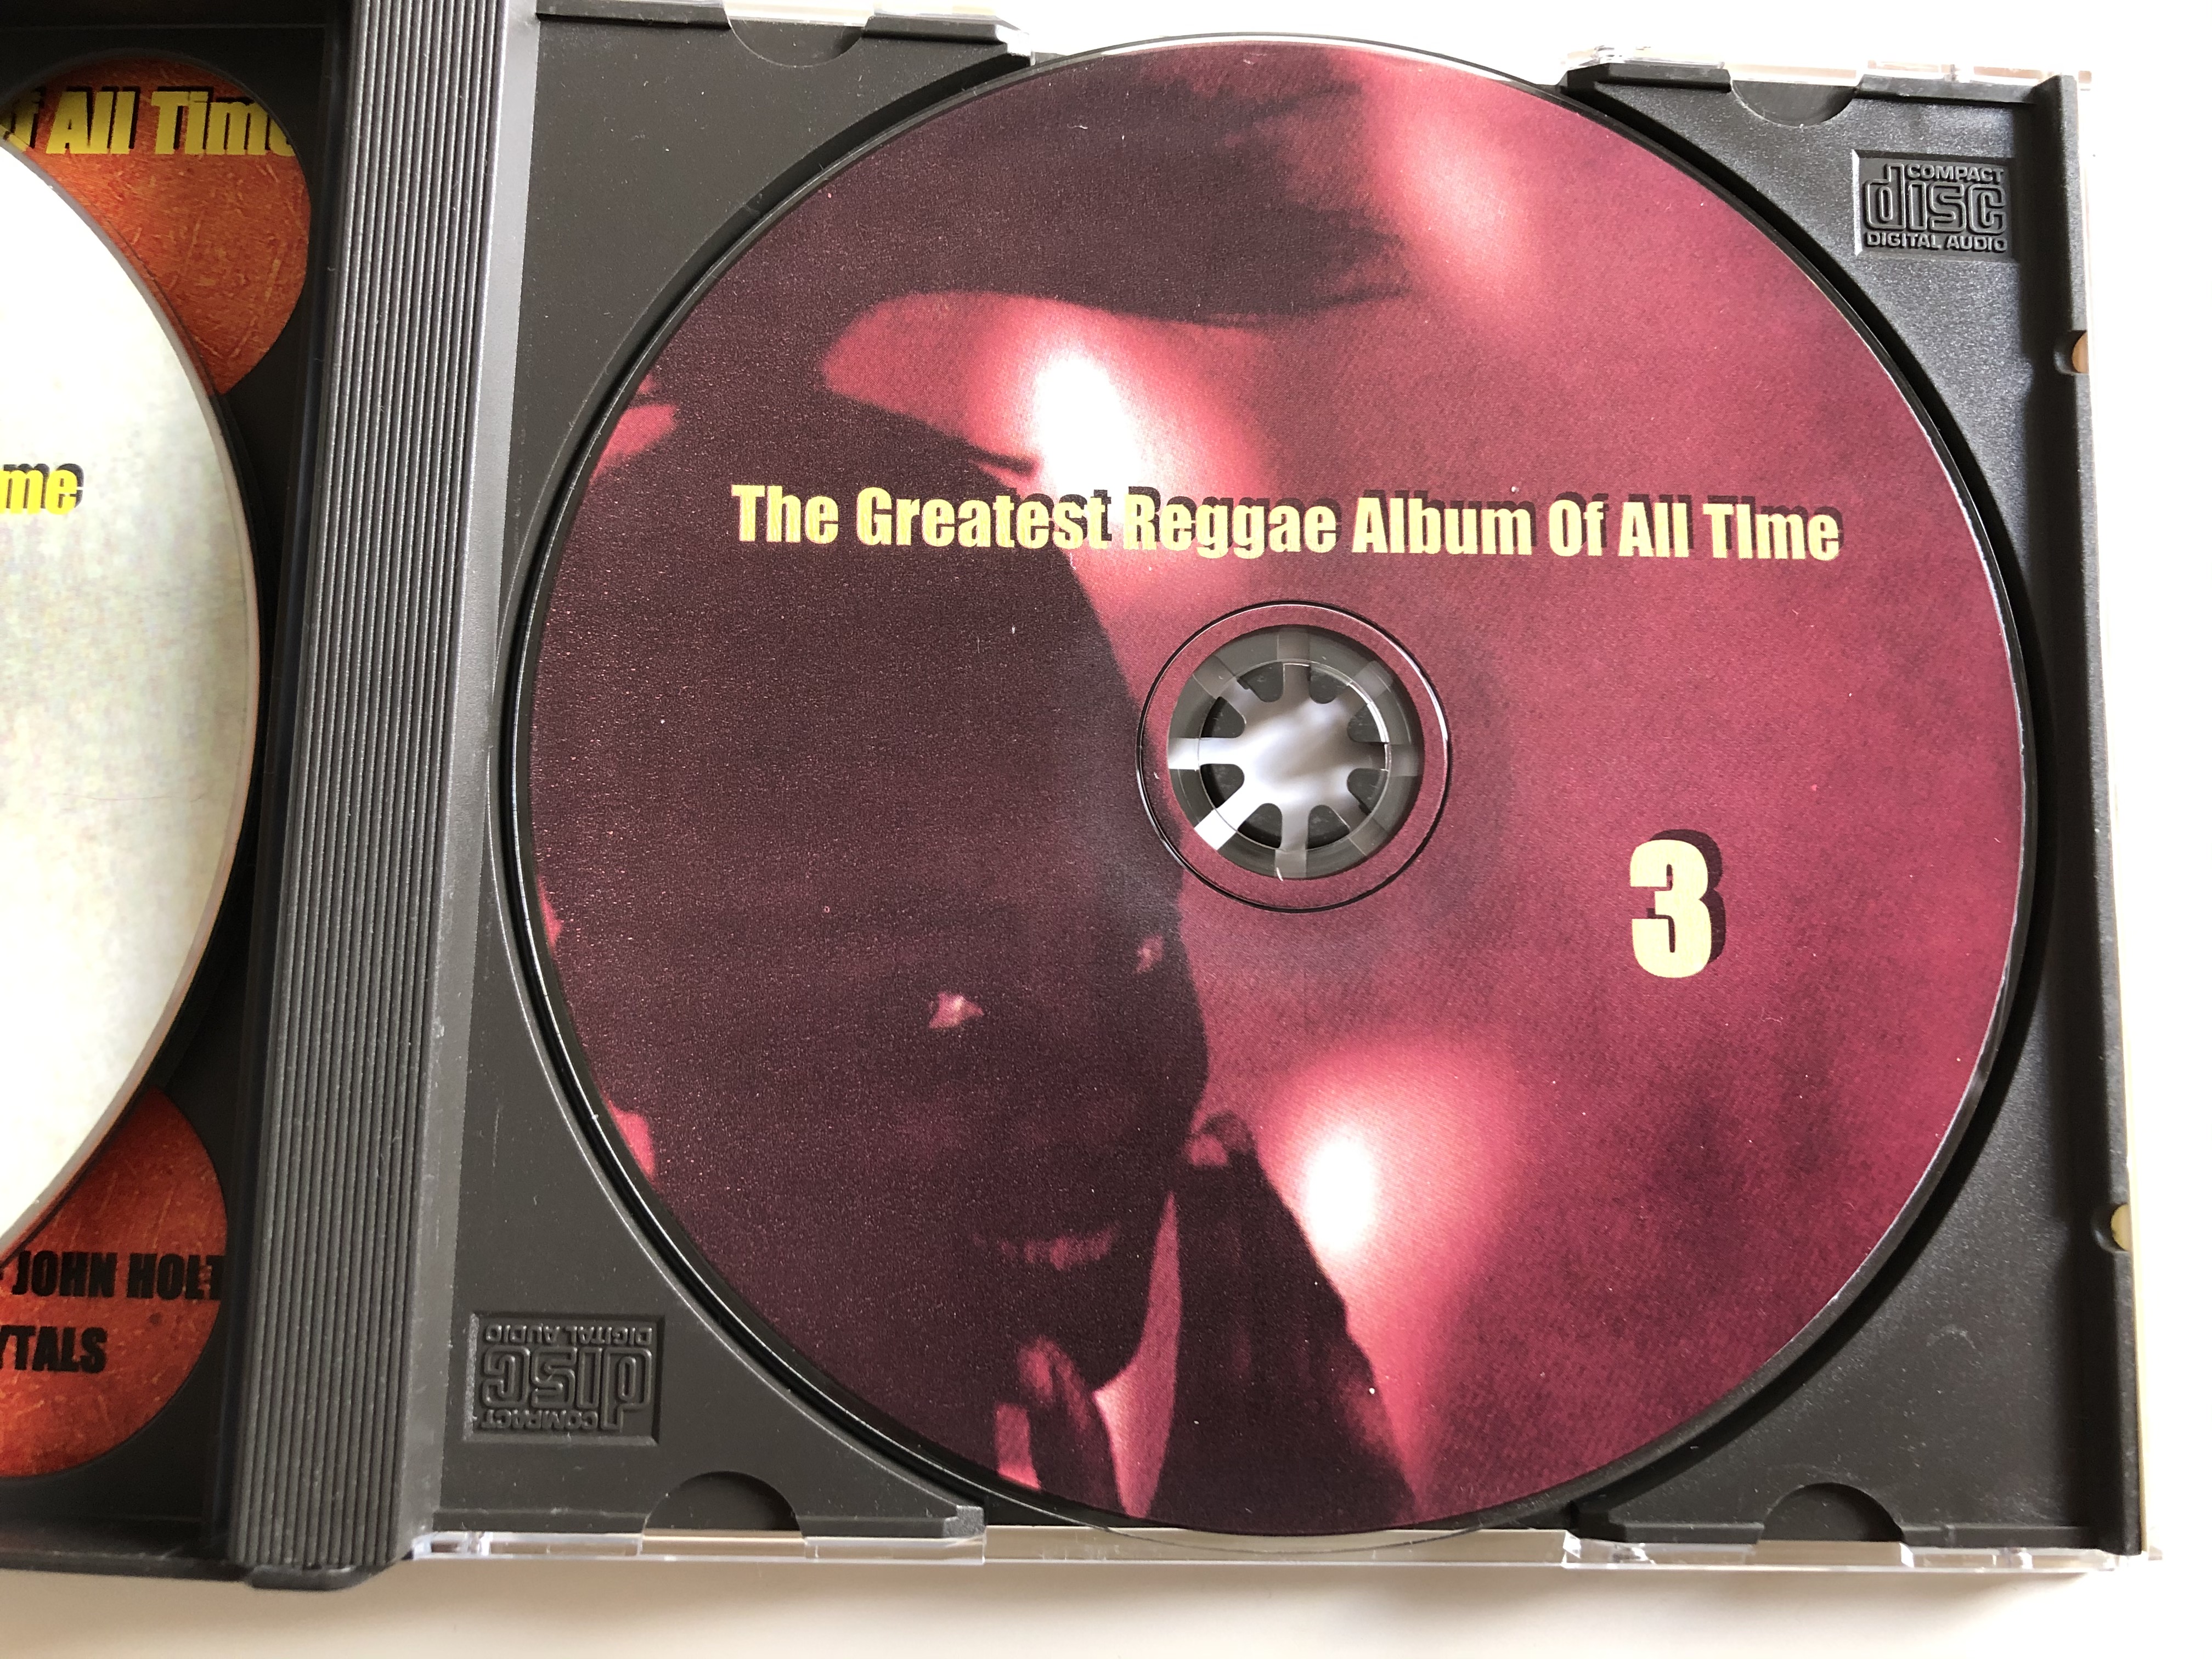 the-greatest-reggae-album-of-all-time-featuring-bob-marley-dennis-brown-gregory-isaacs-dillinger-desmond-dekker-yellowman-john-holt-maytals-u.-brown-plus-many-more-dressed-to-kill-3x-8-.jpg